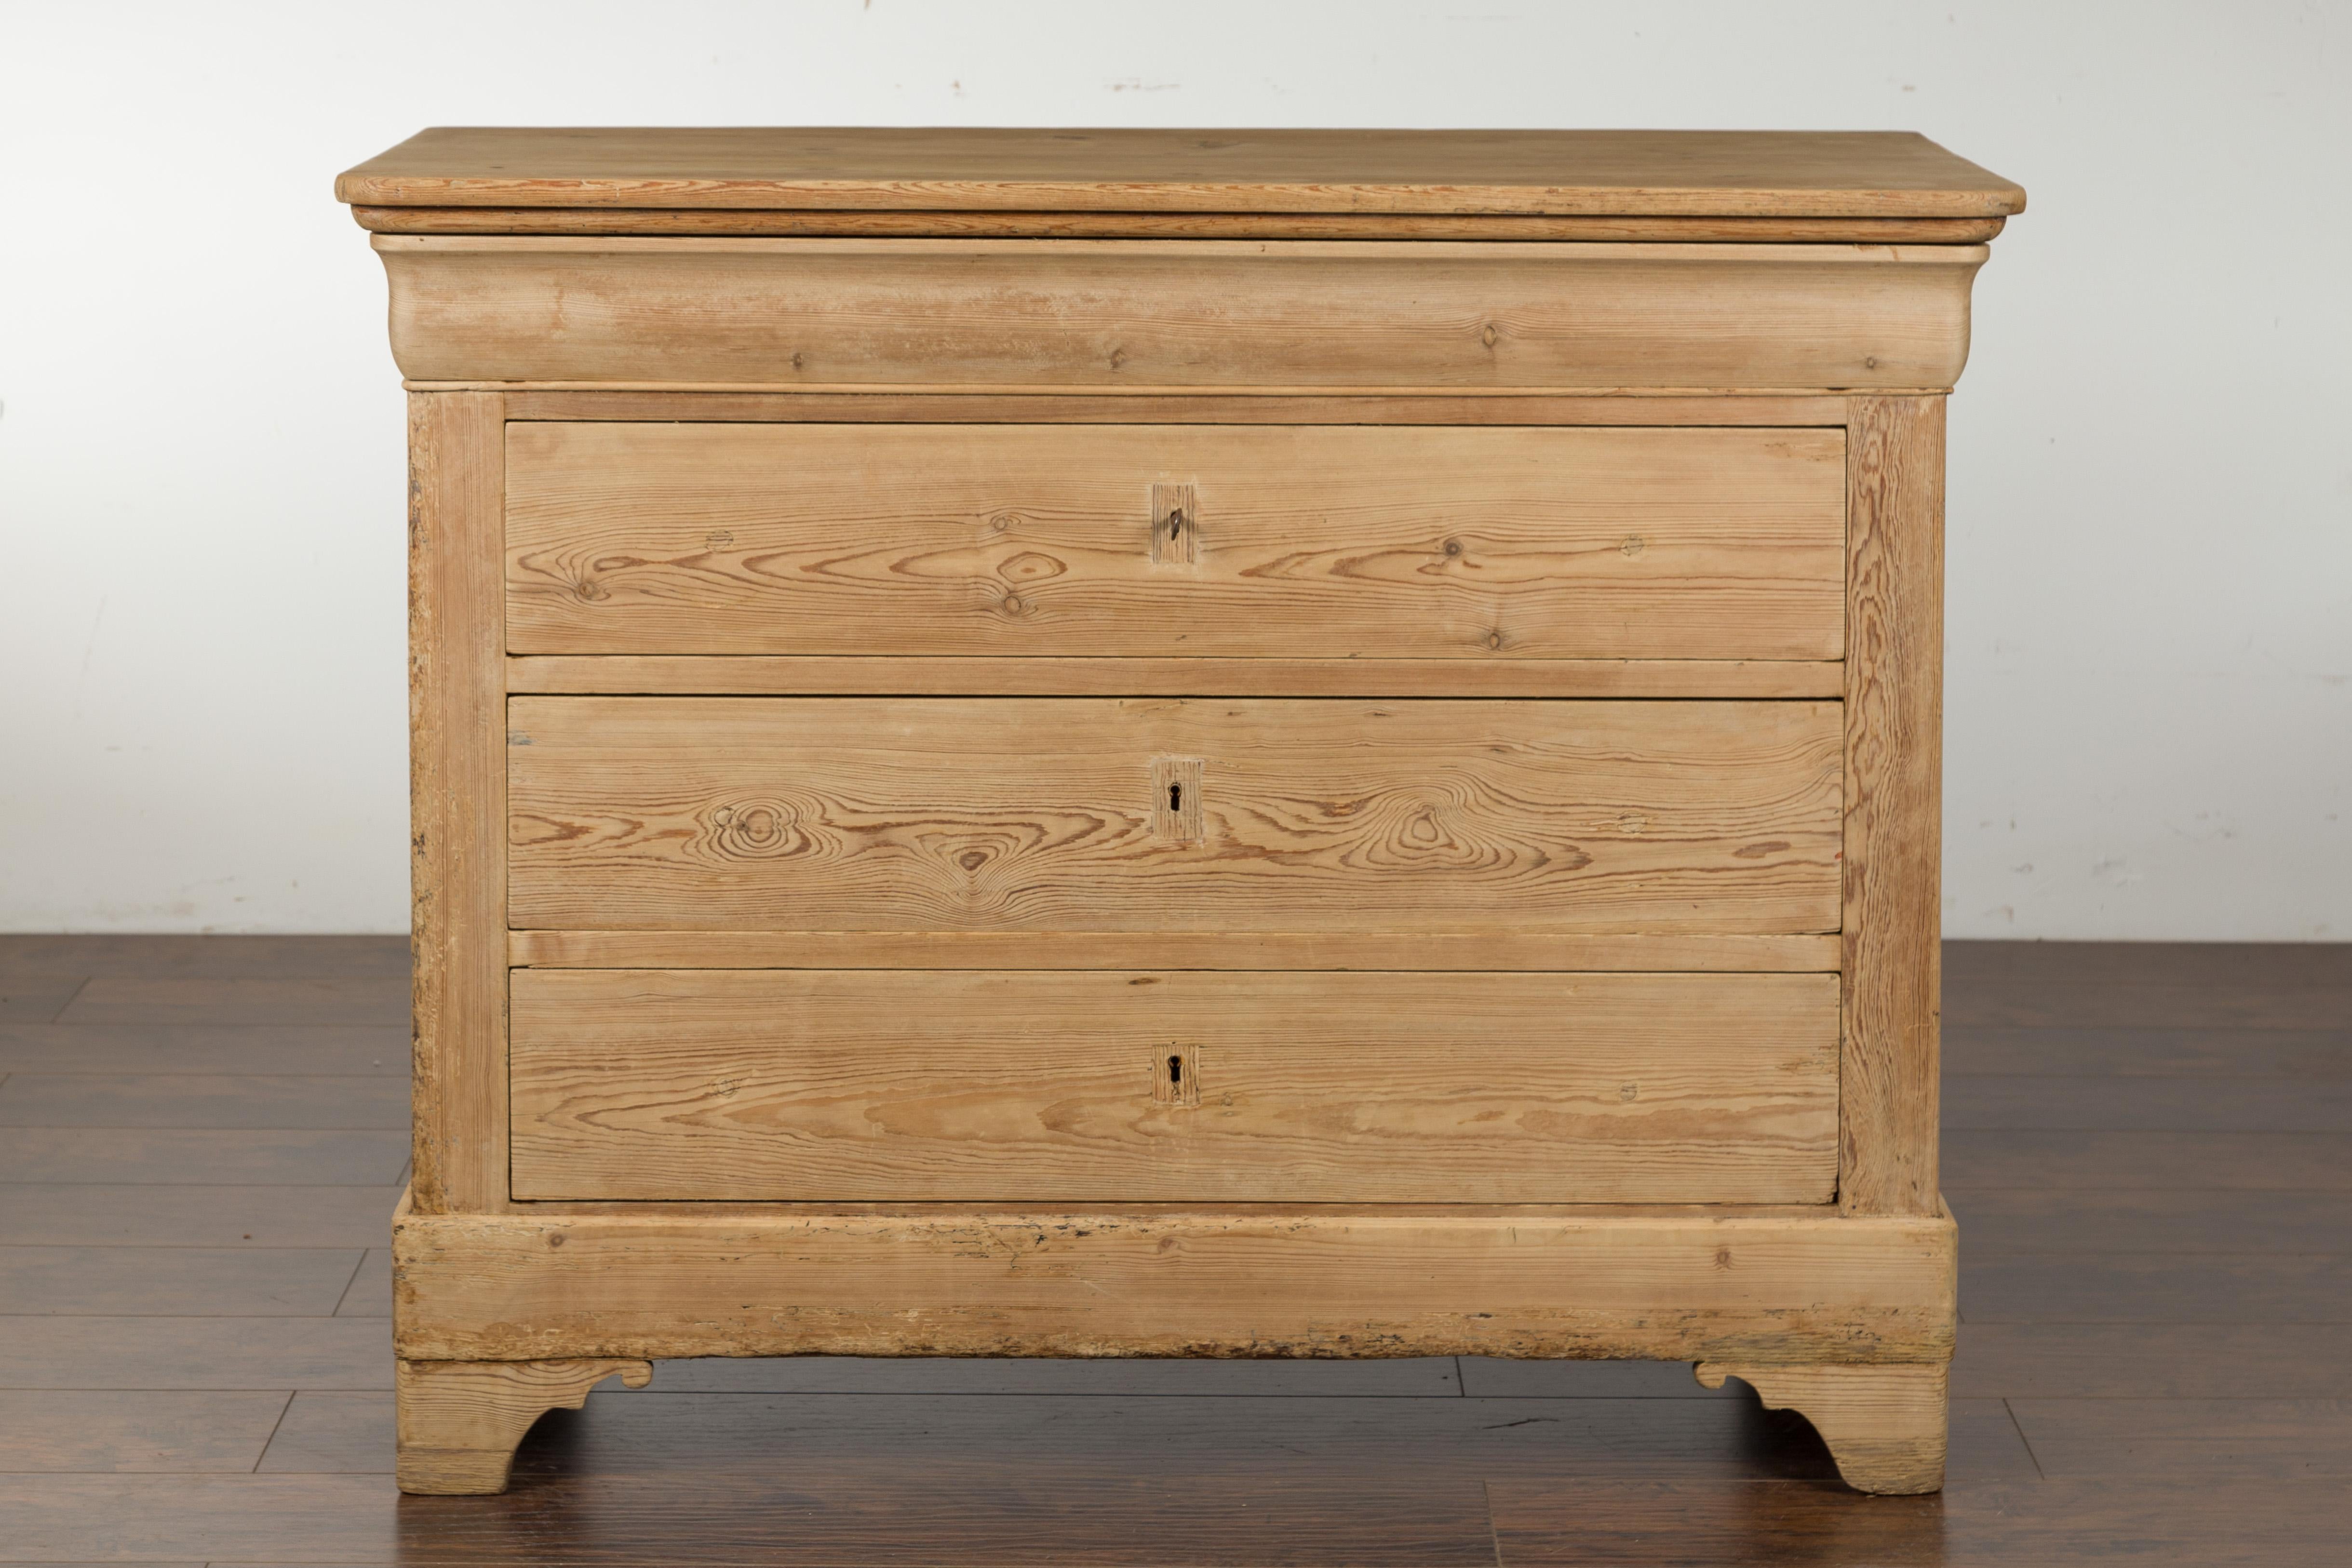 A French Louis-Philippe style four-drawer pine commode from the late 19th century, with bracket feet. Created in France during the last quarter of the 19th century, this pine commode features a rectangular top with rounded corners in the front,